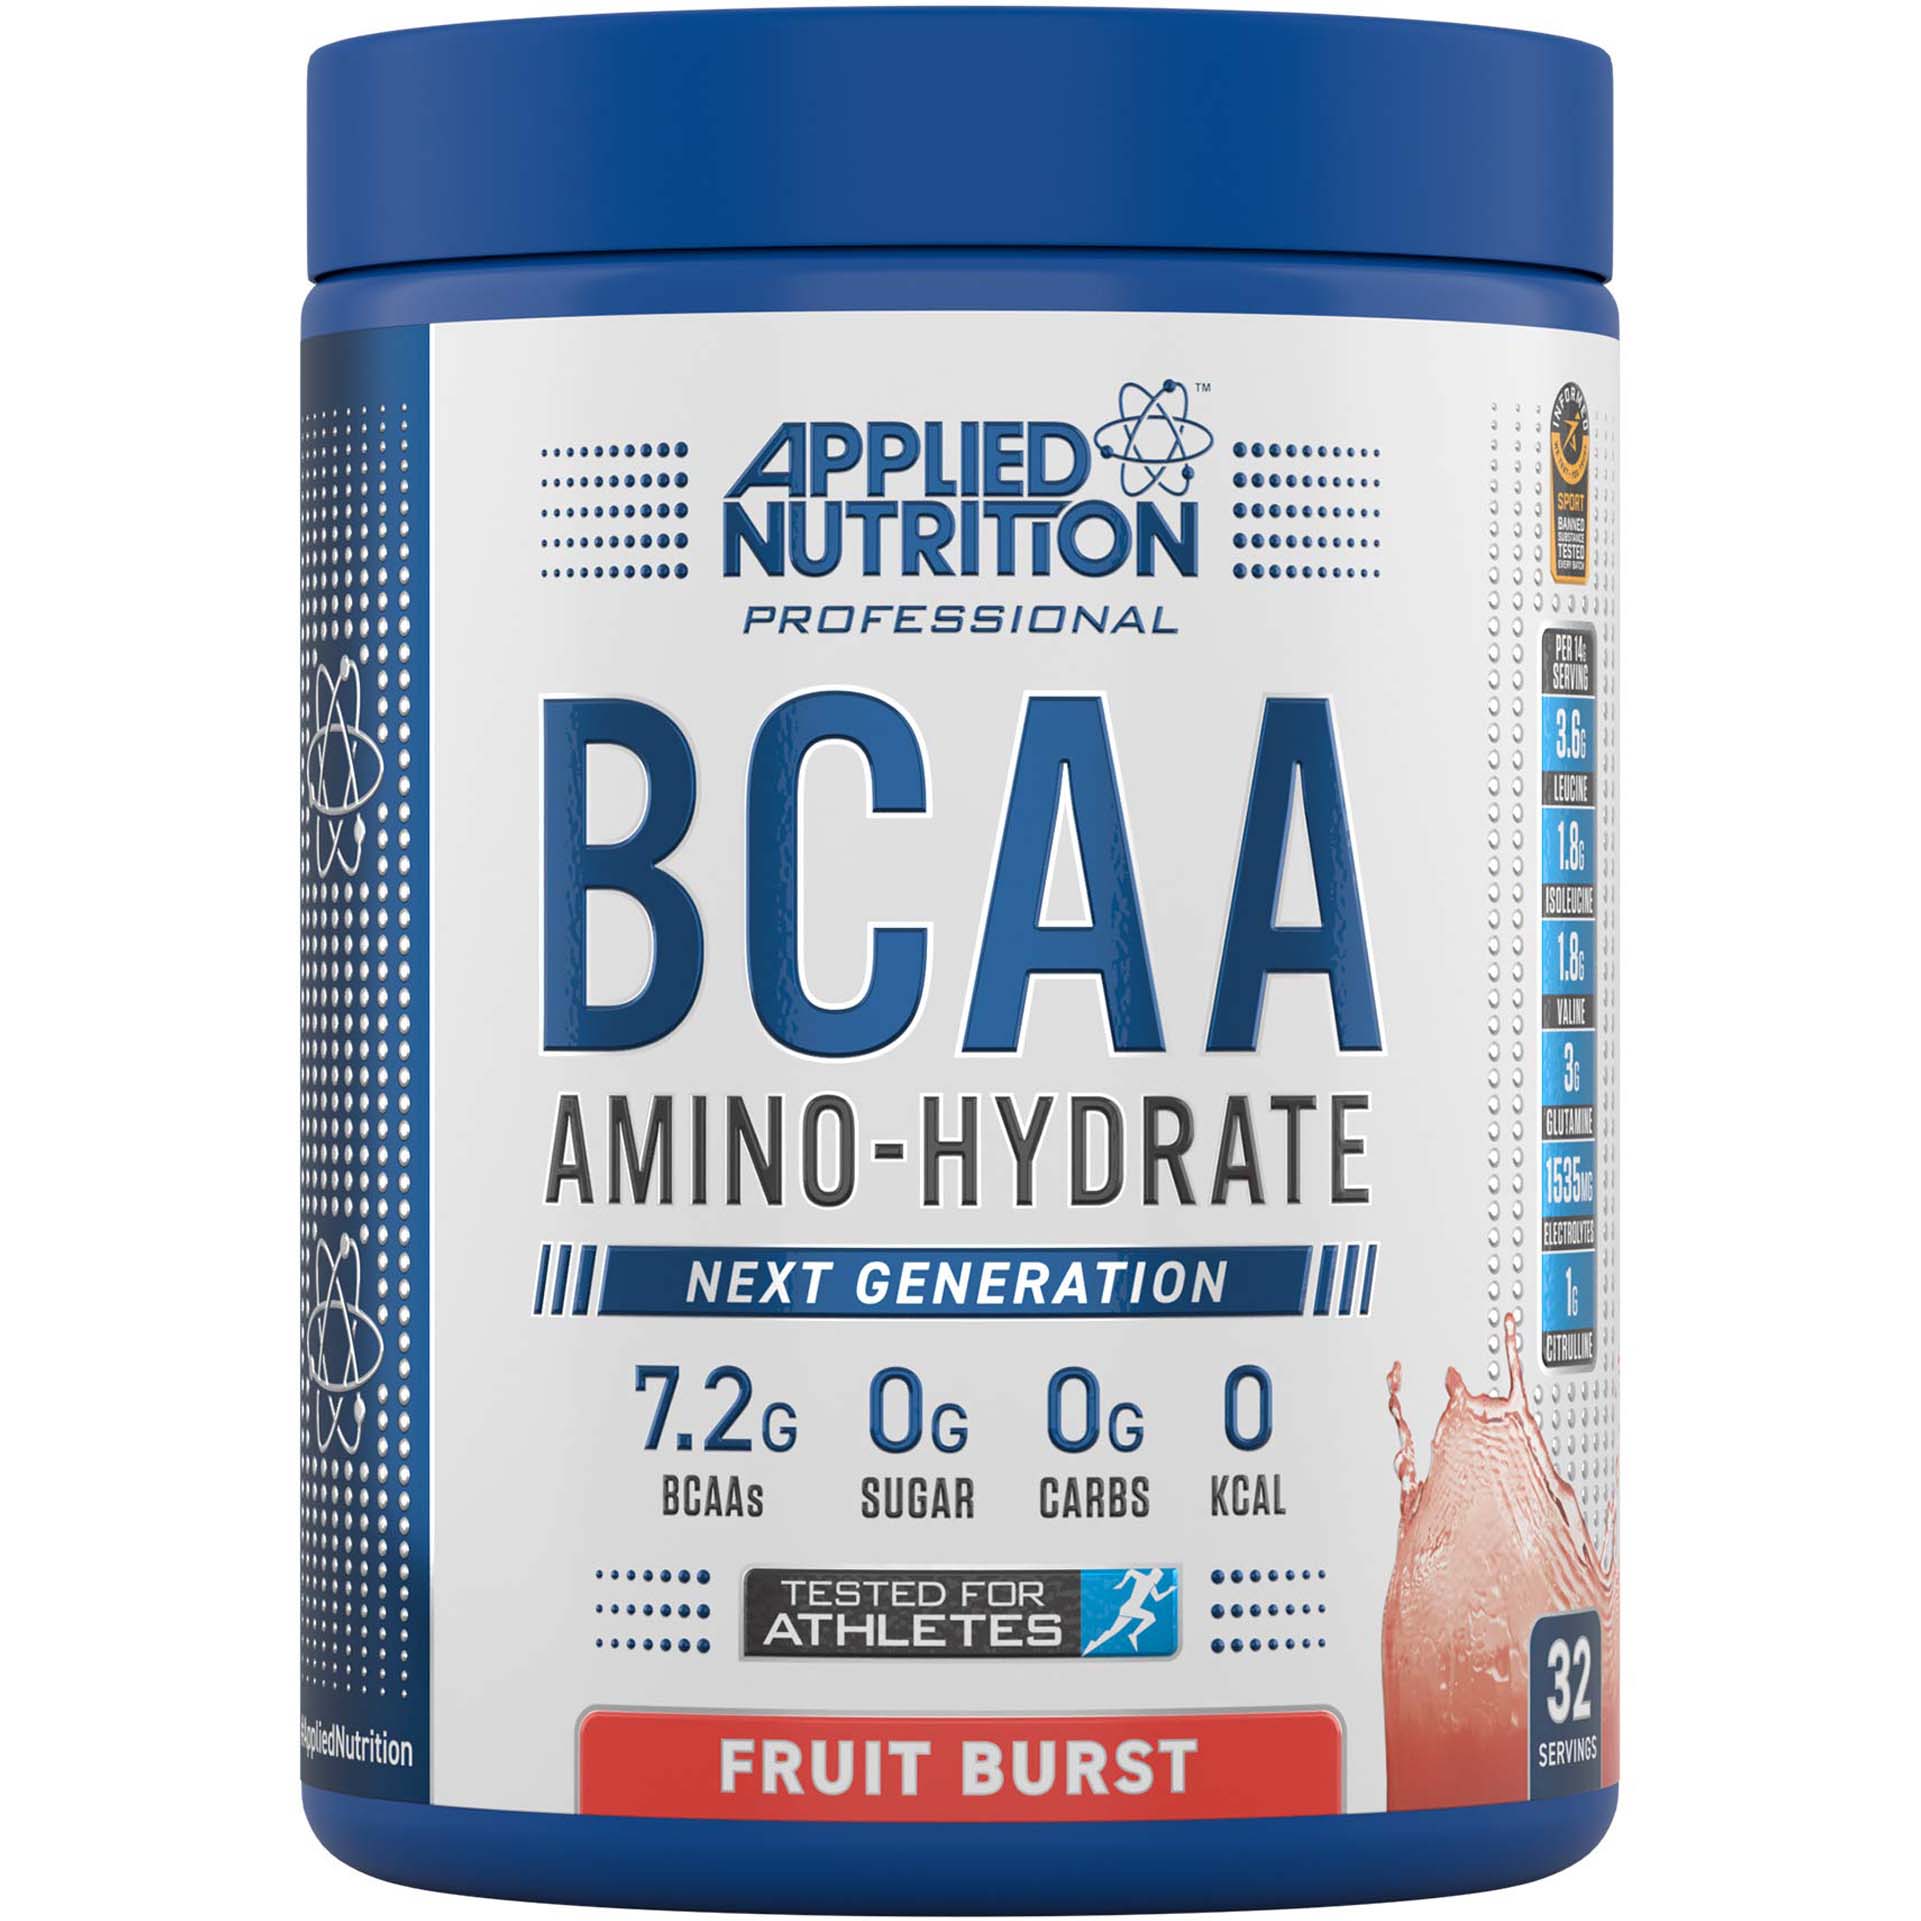 Applied Nutrition BCAA Amino Hydrate, Fruit Burst, 32 Serving